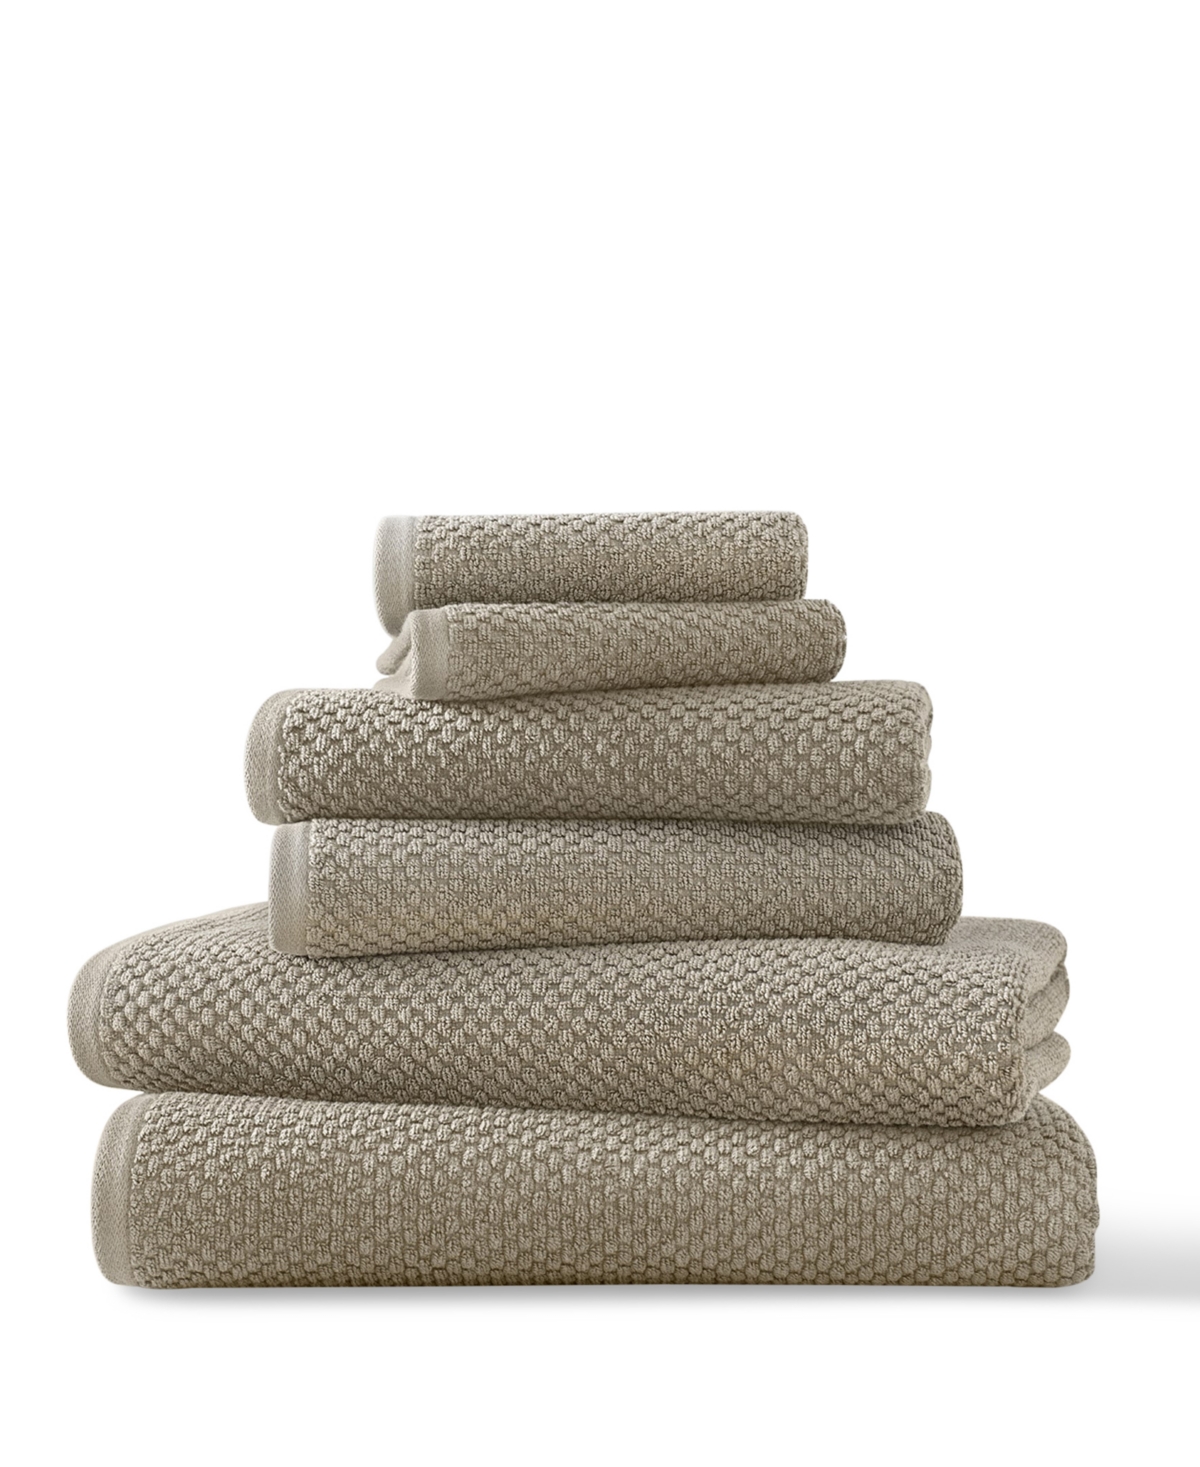 Blue Loom Lilly Cotton And Rayon From Bamboo 6 Piece Towel Set Bedding In Taupe